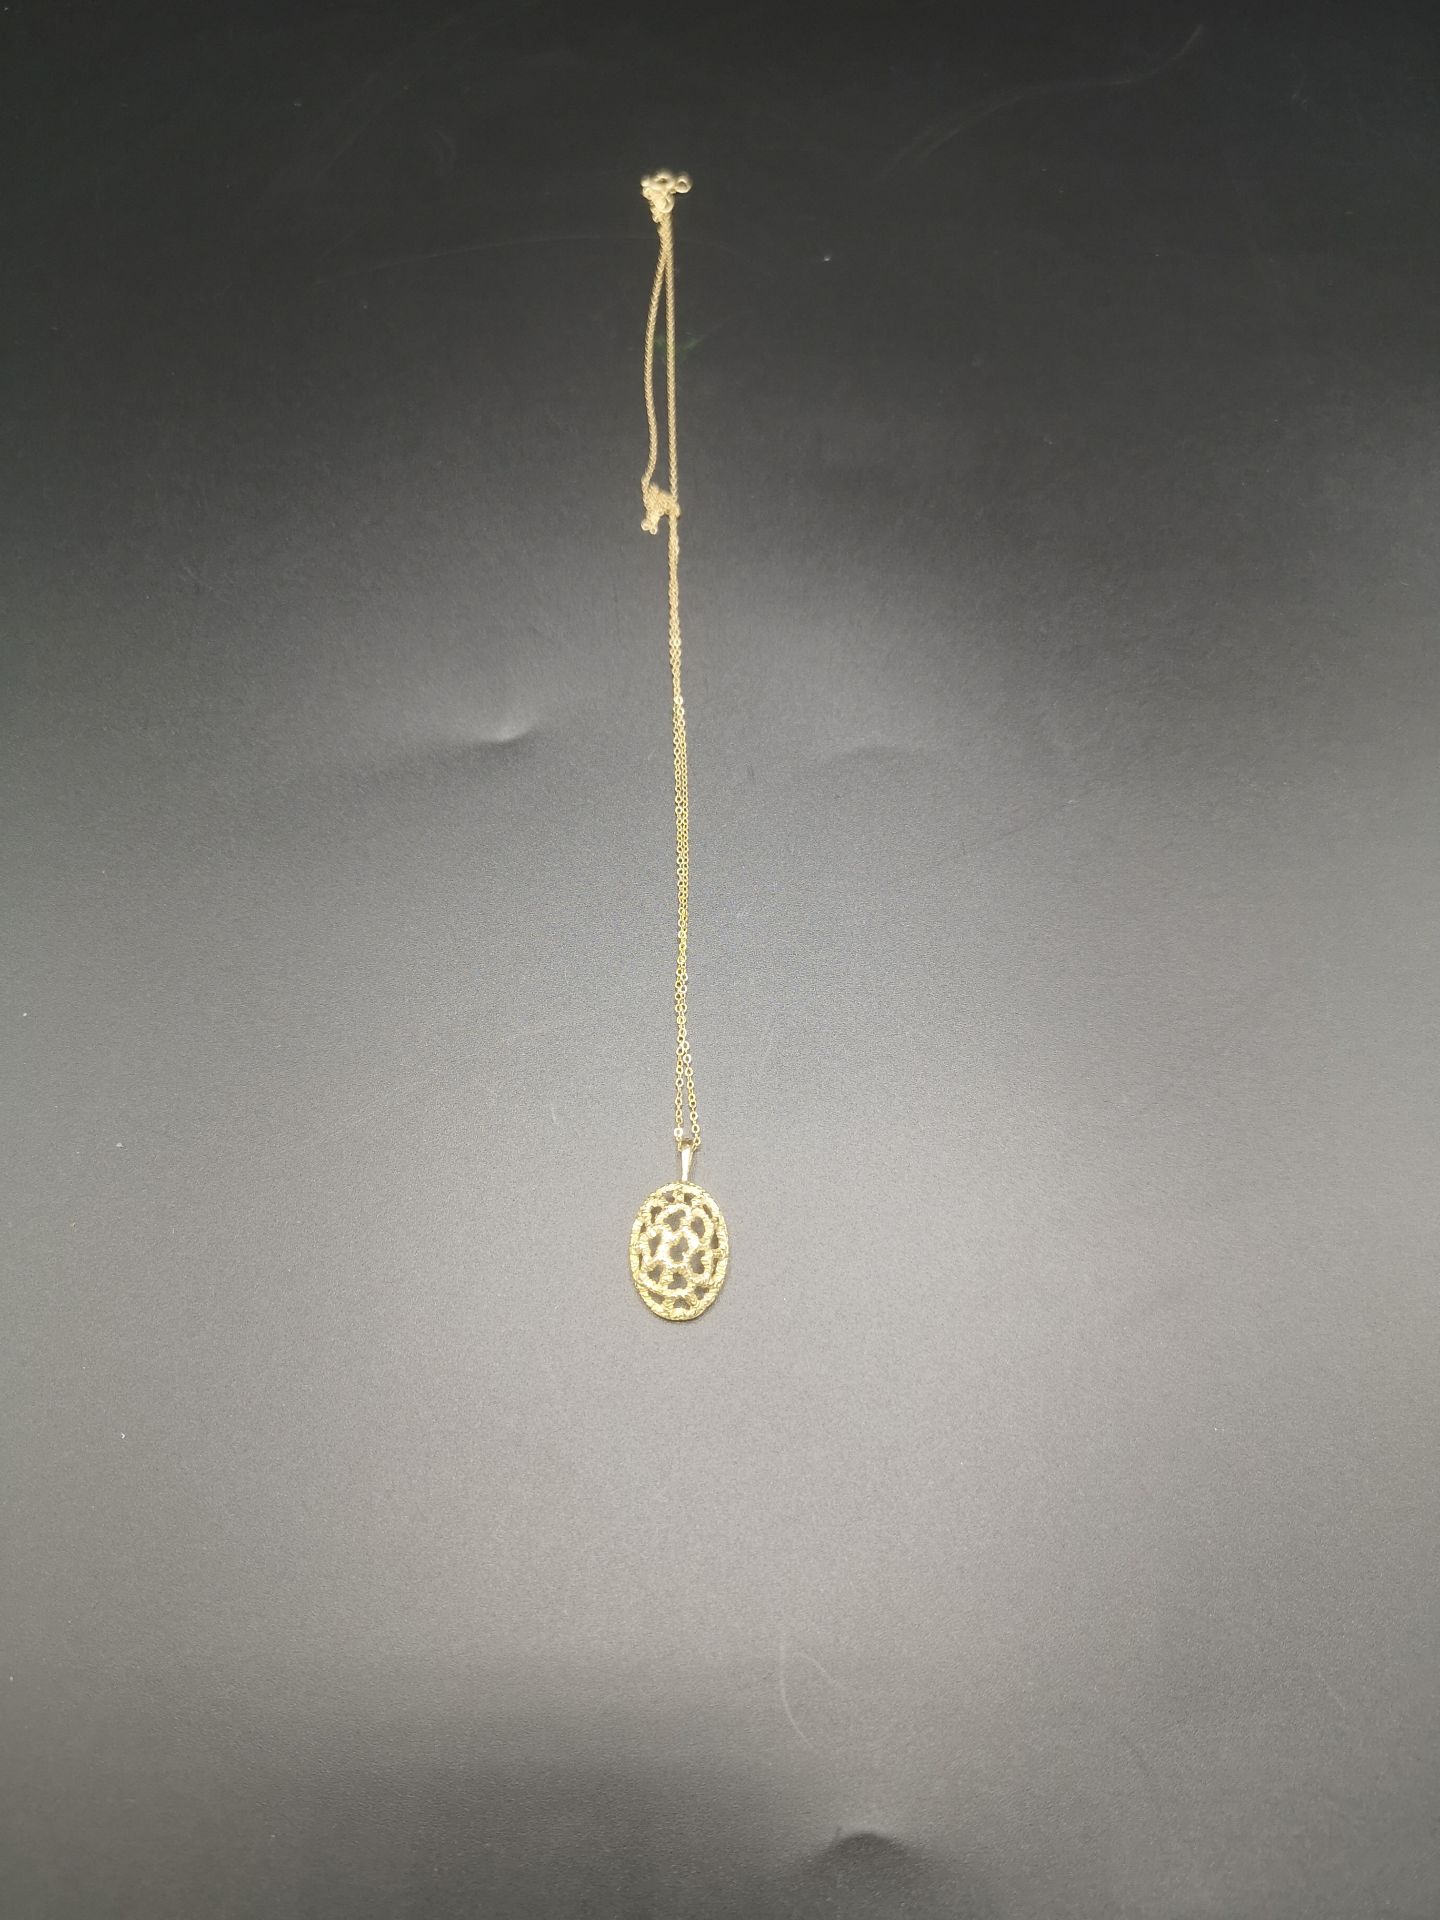 9ct gold necklace and pendant - Image 2 of 6